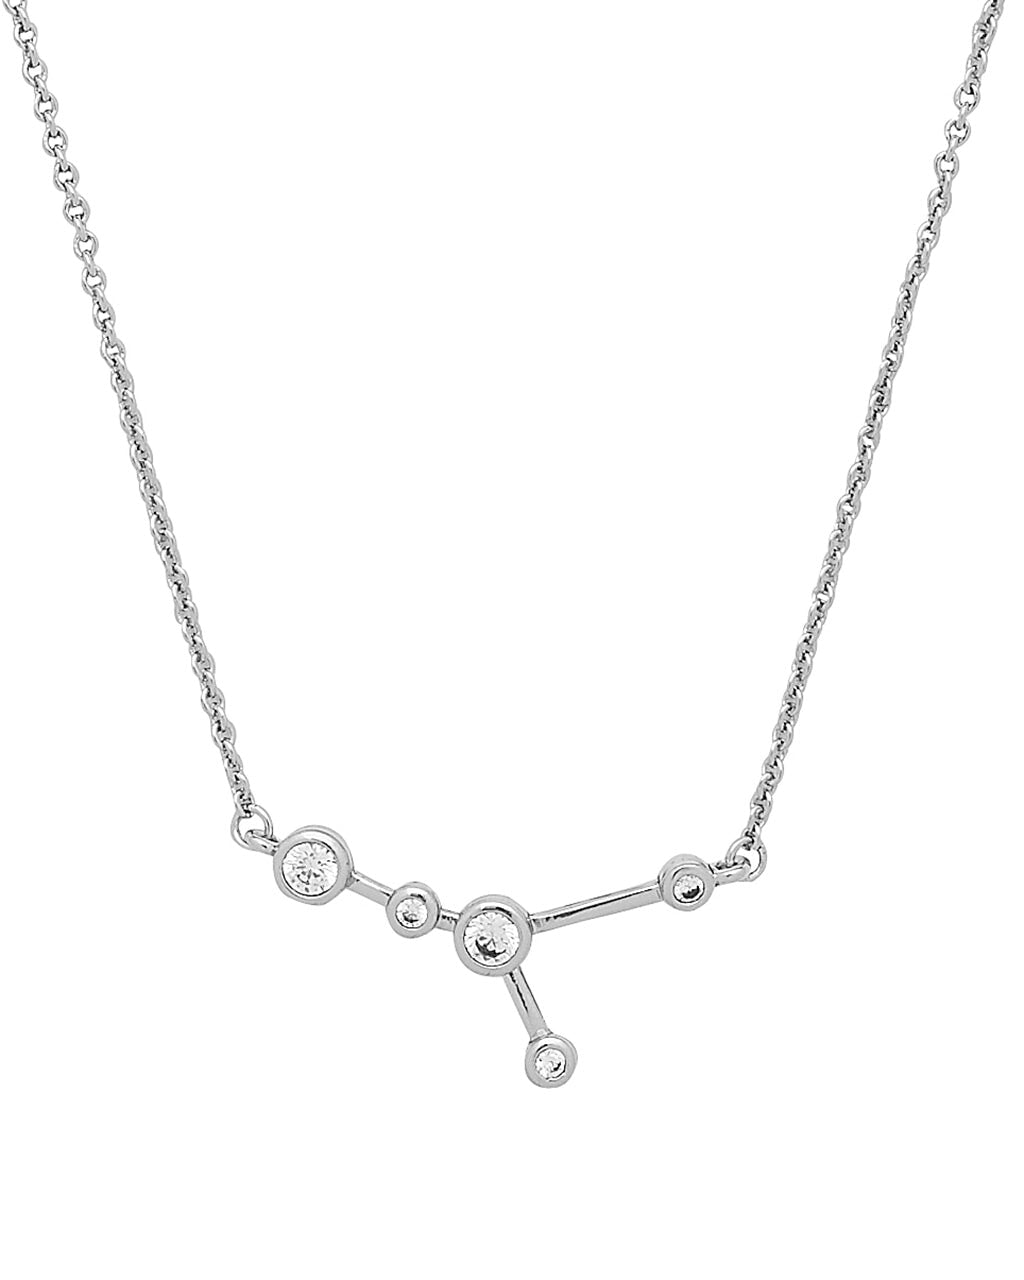 'When Stars Align' Constellation Necklace Necklace Sterling Forever Silver Cancer (Jun 21 - Jul 22) 